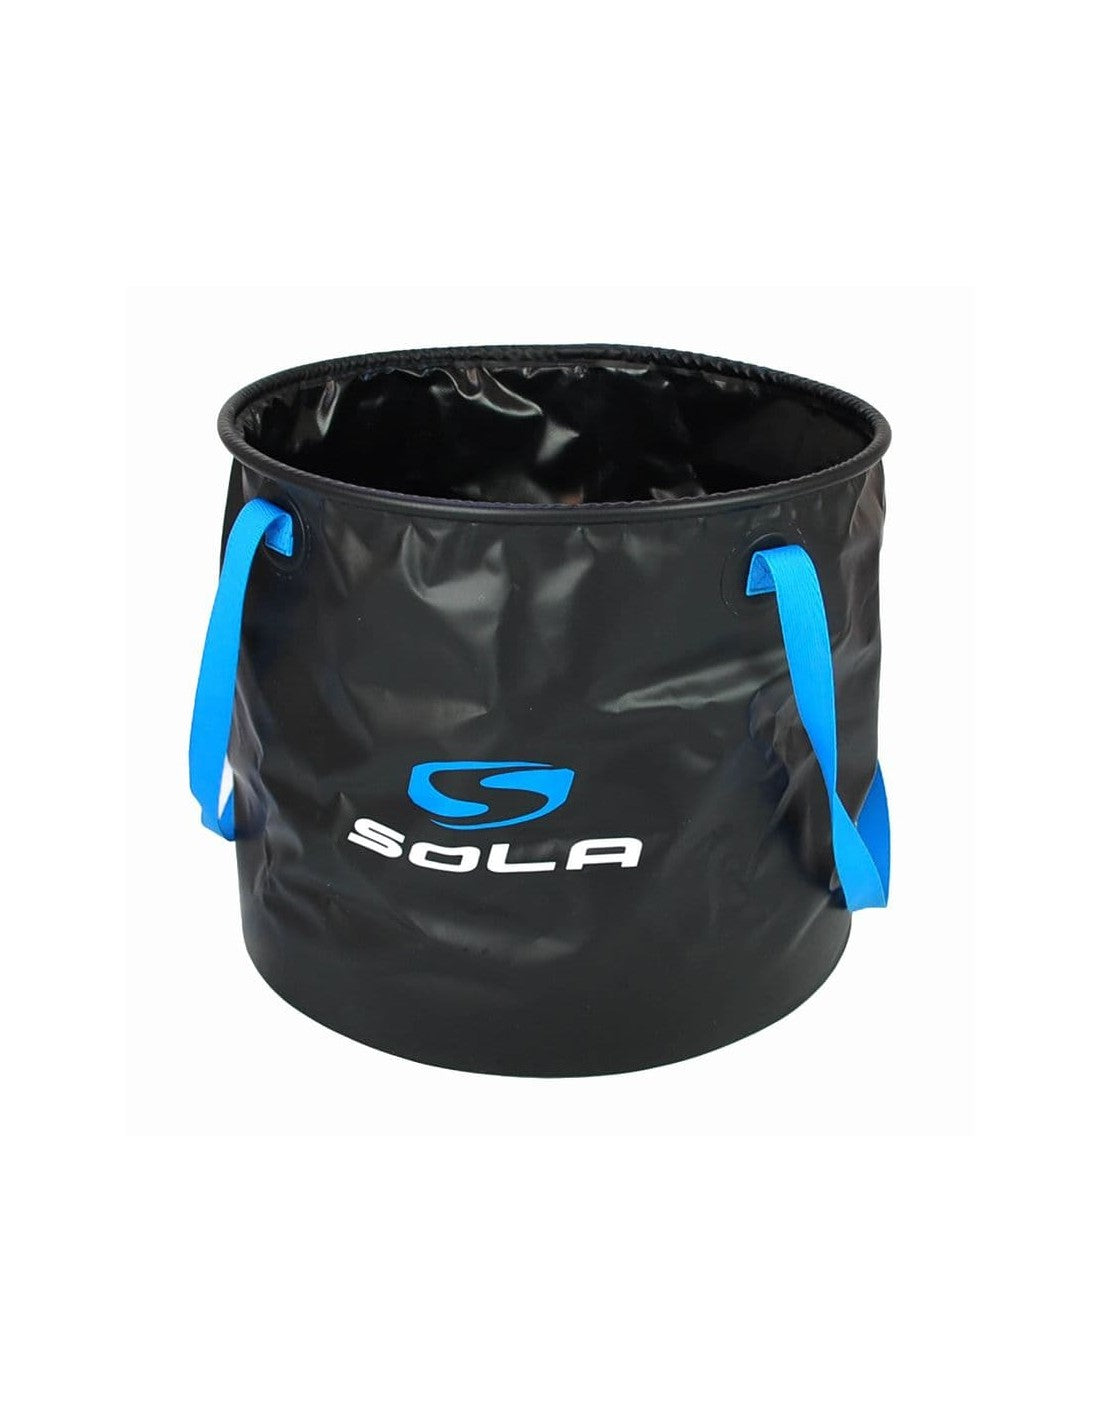 Sola WETTY Collapsible Changing Bucket - Black